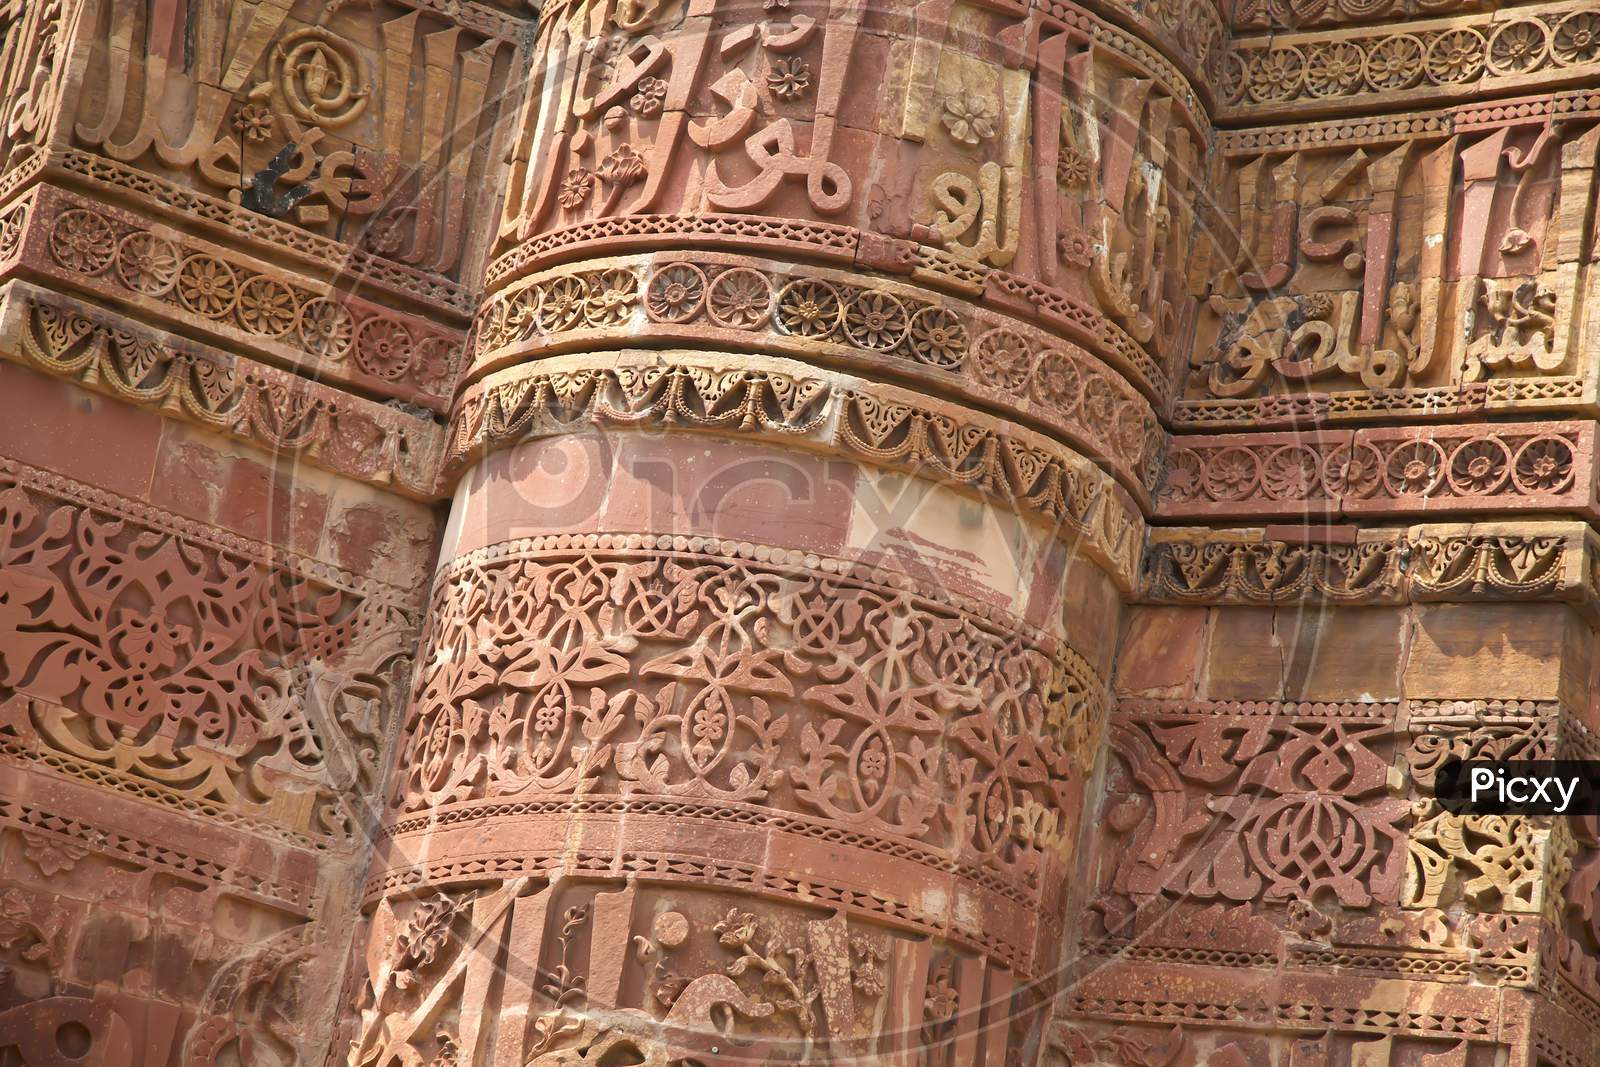 Carving On The Qutub Minar In India, Patterns And Script Are Carved Into The Qutub Minar